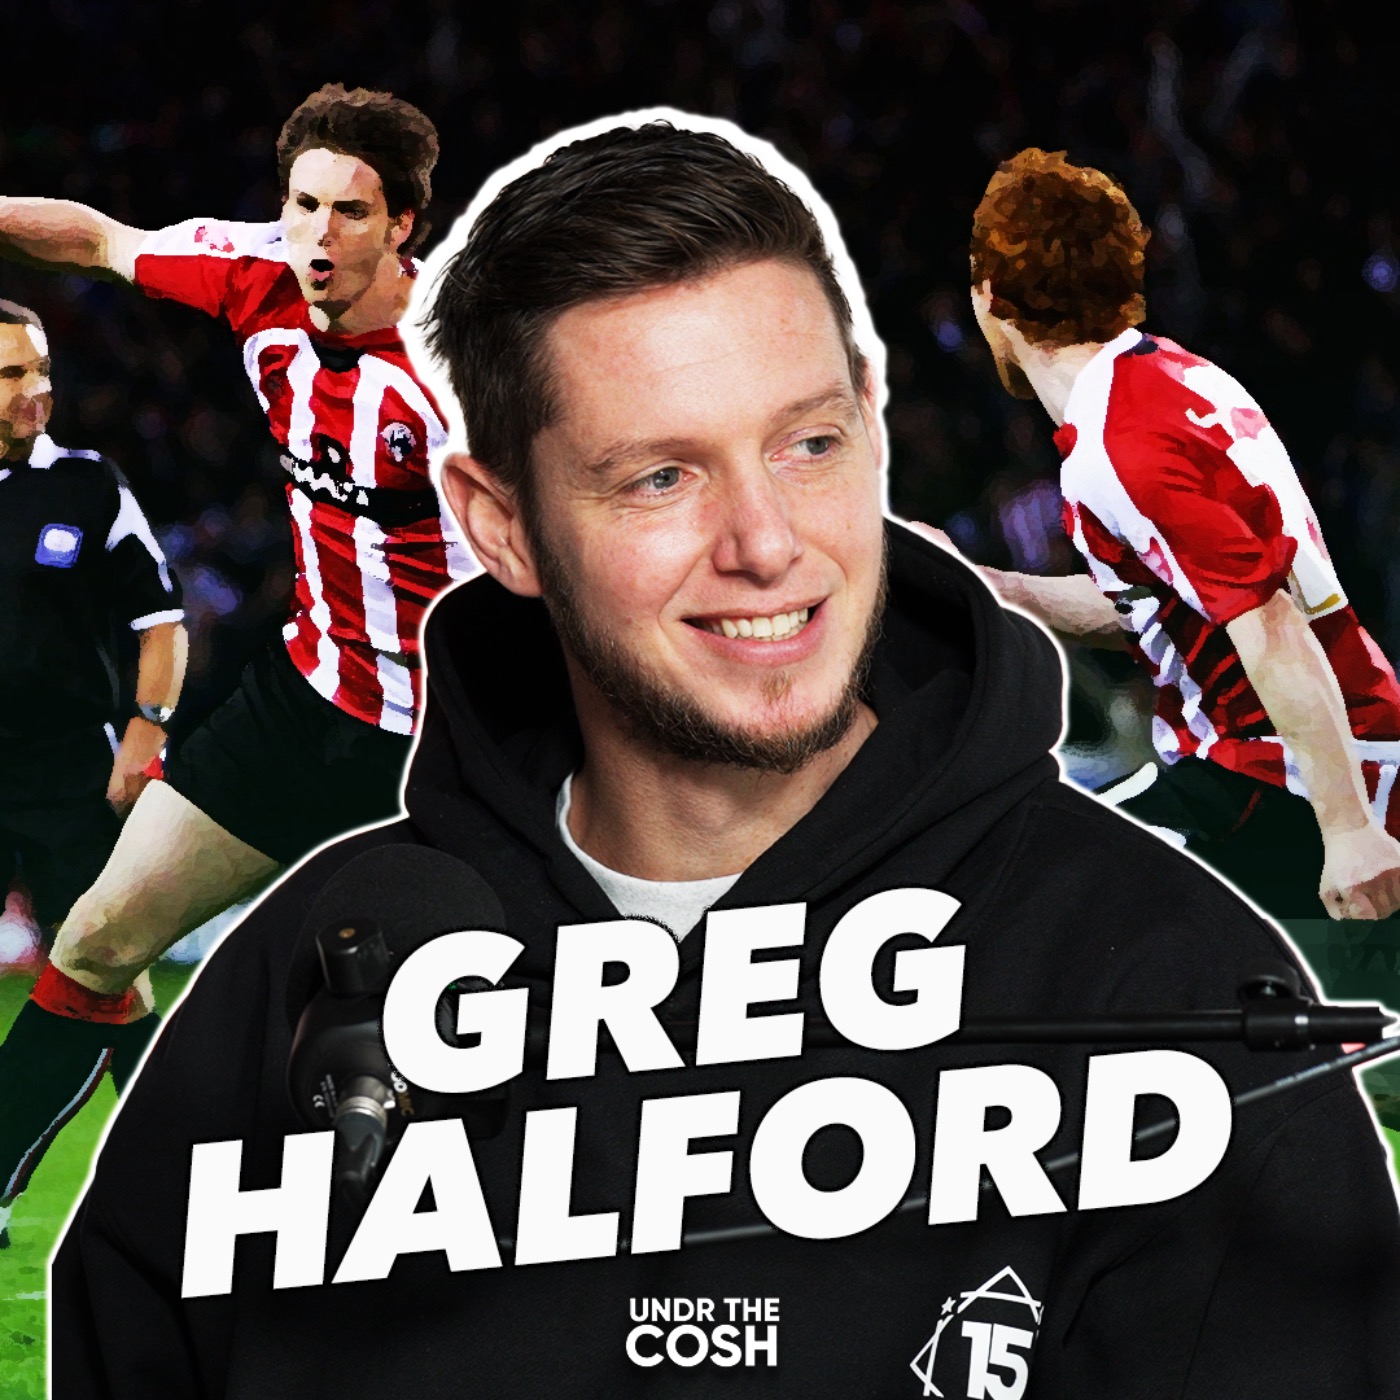 Greg Halford | "I Wouldn't Have Told Anyone In Football About My Autism"